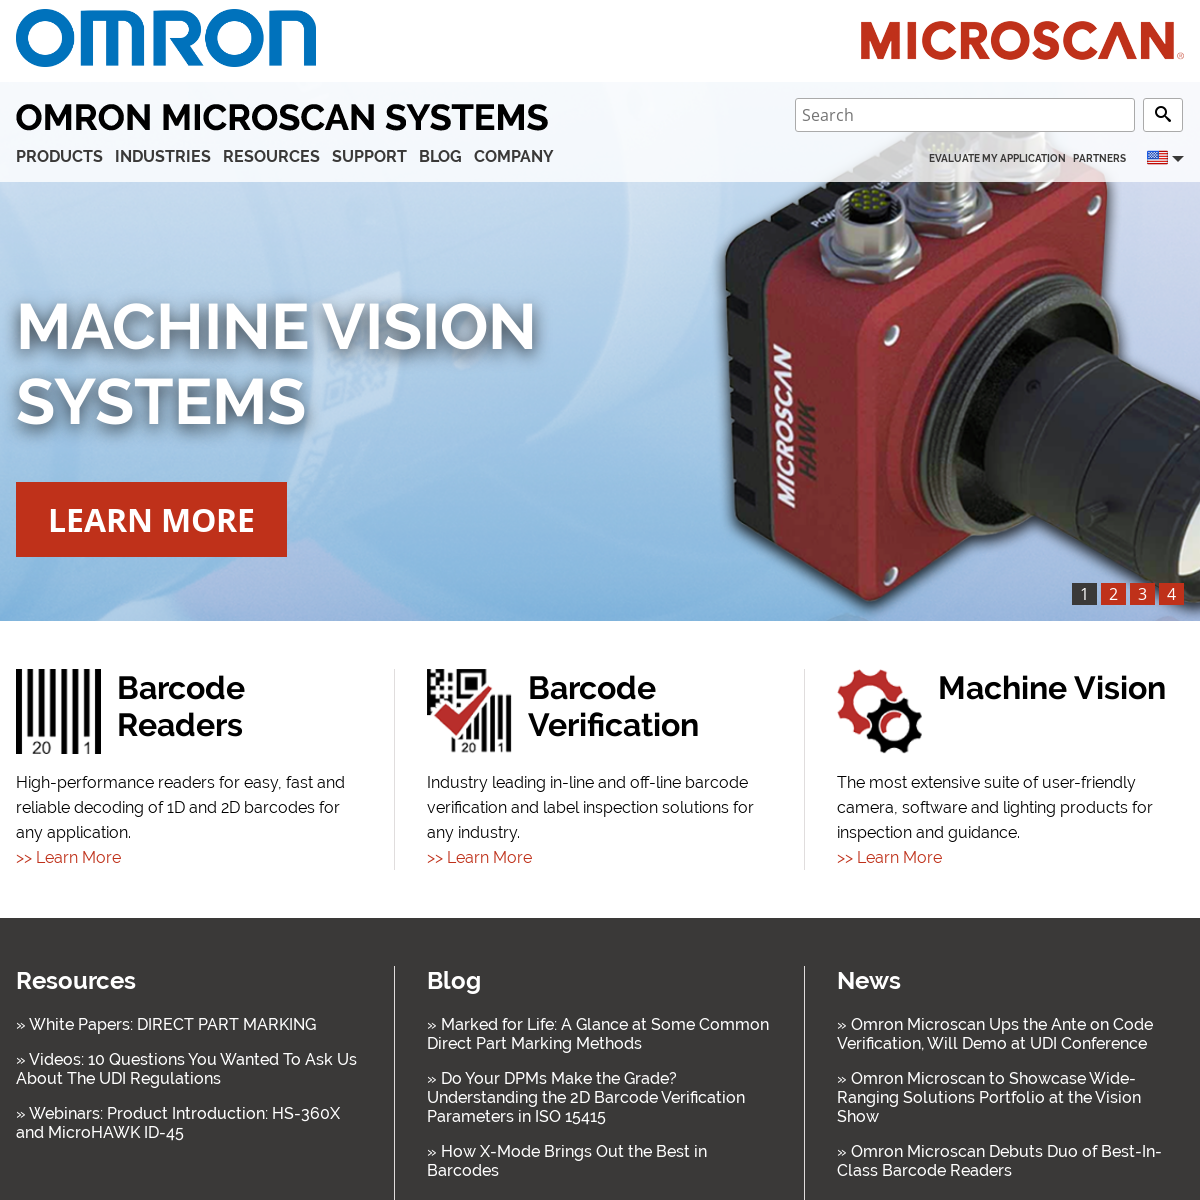 A complete backup of microscan.com